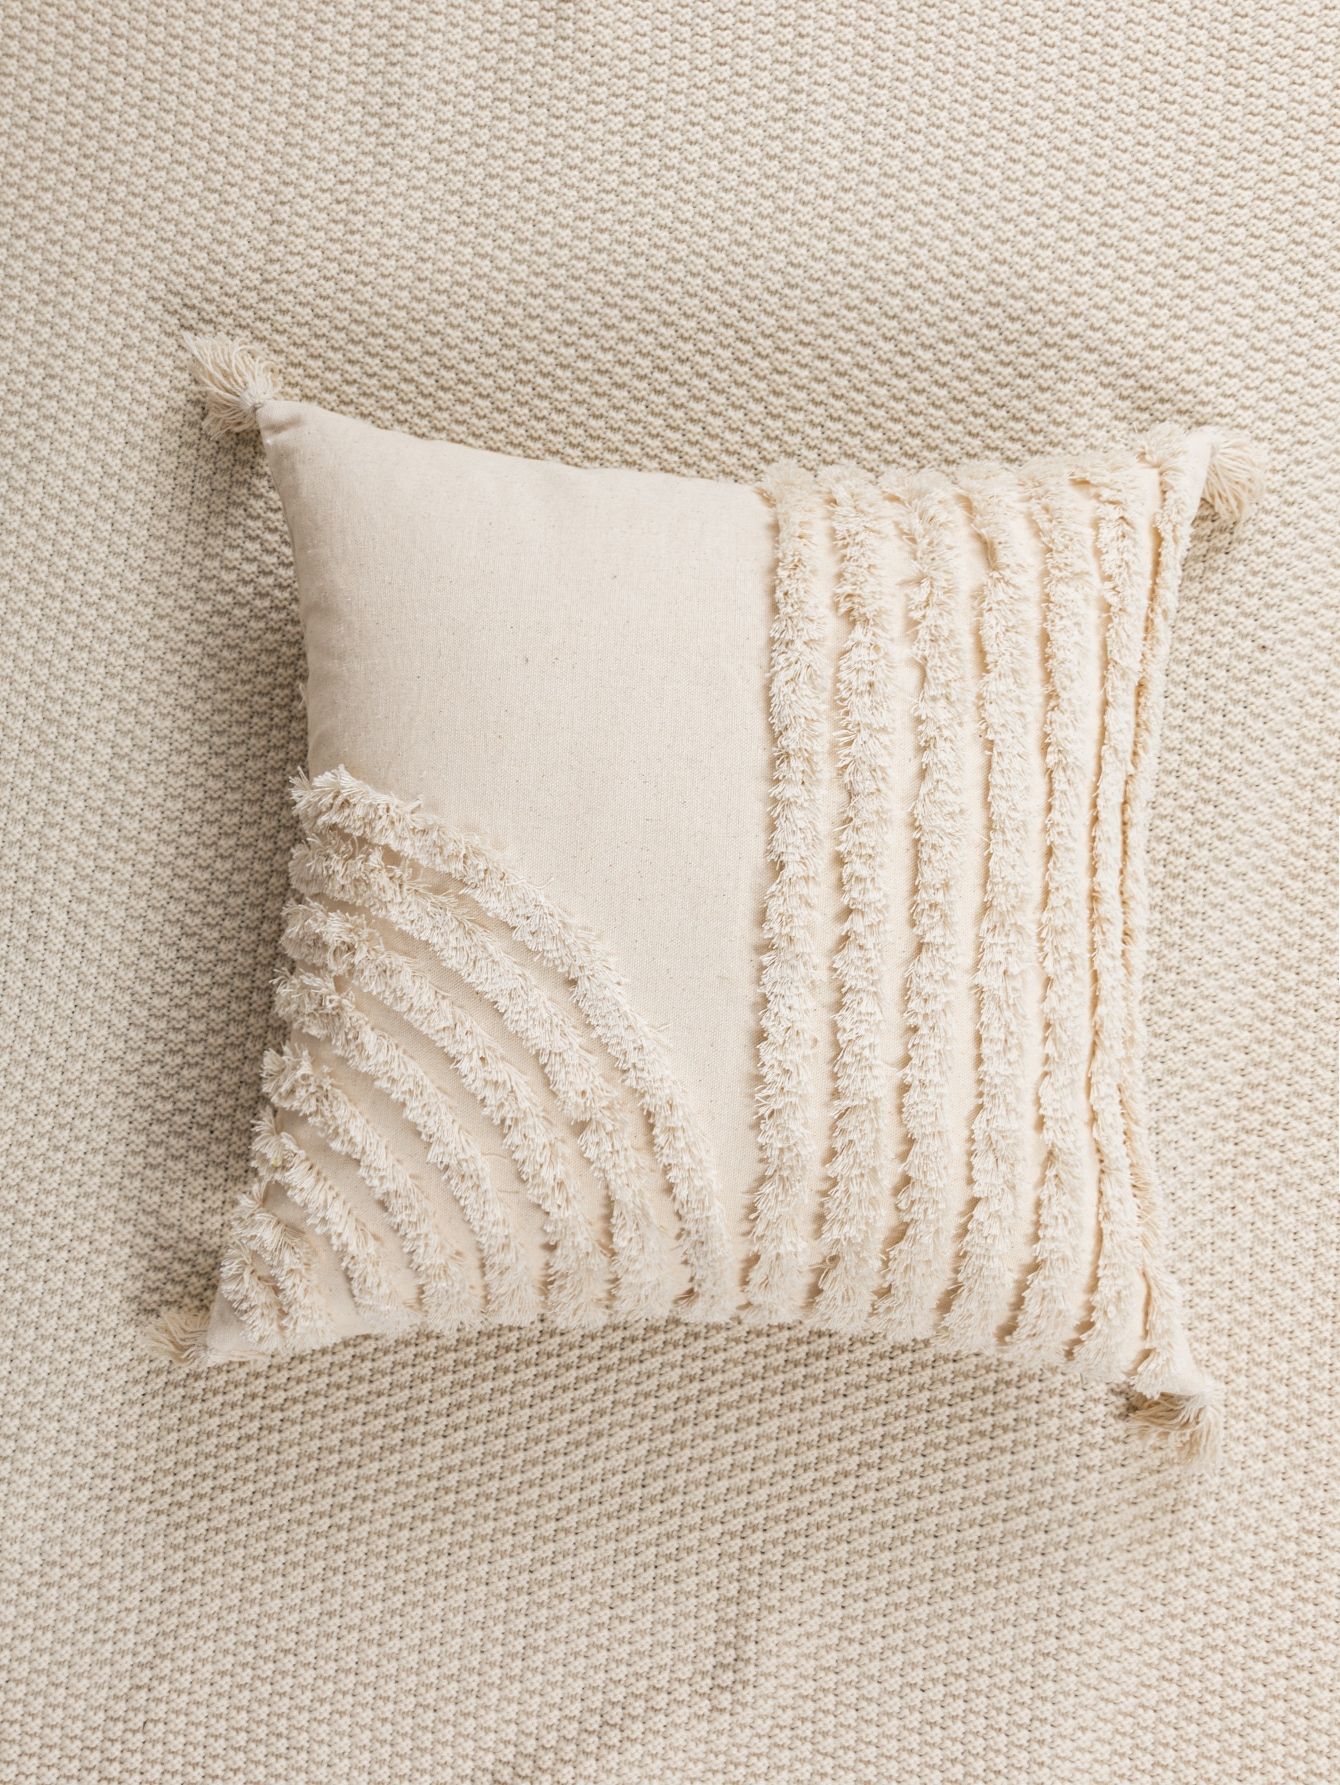 Tassel Trim Cushion Cover Without Filler | SHEIN